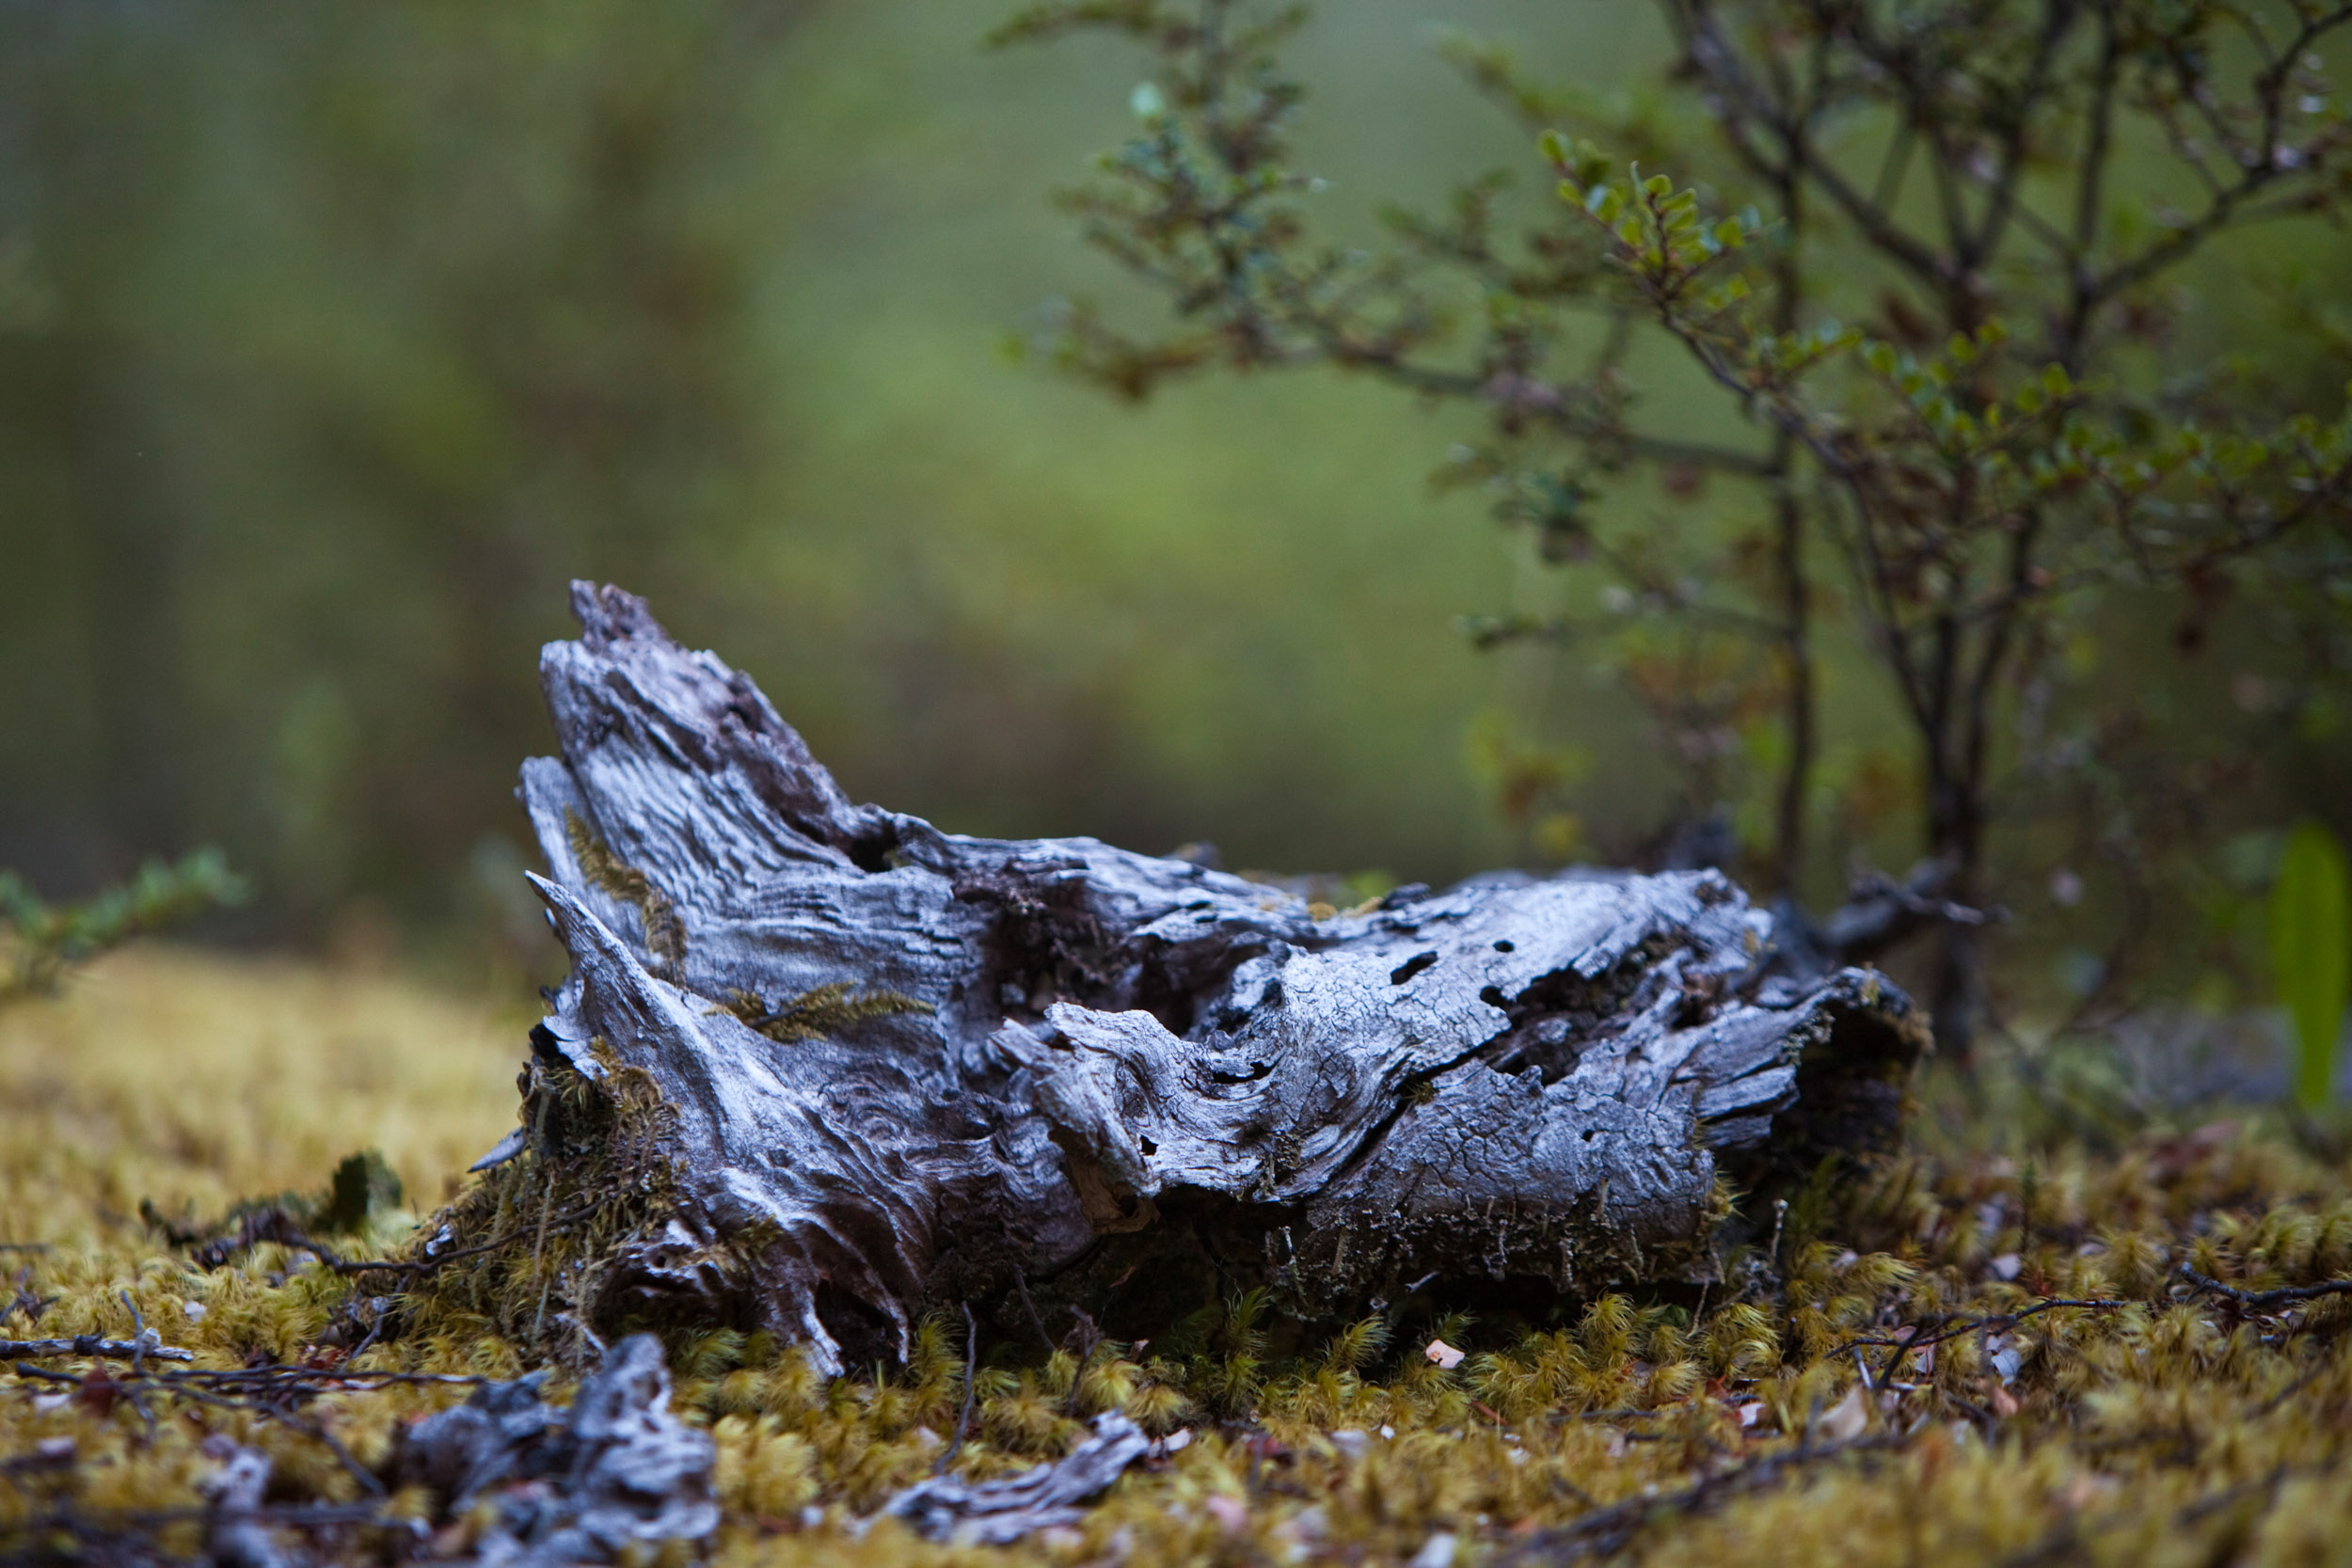 A piece of driftwood slowly becomes home to forest moss